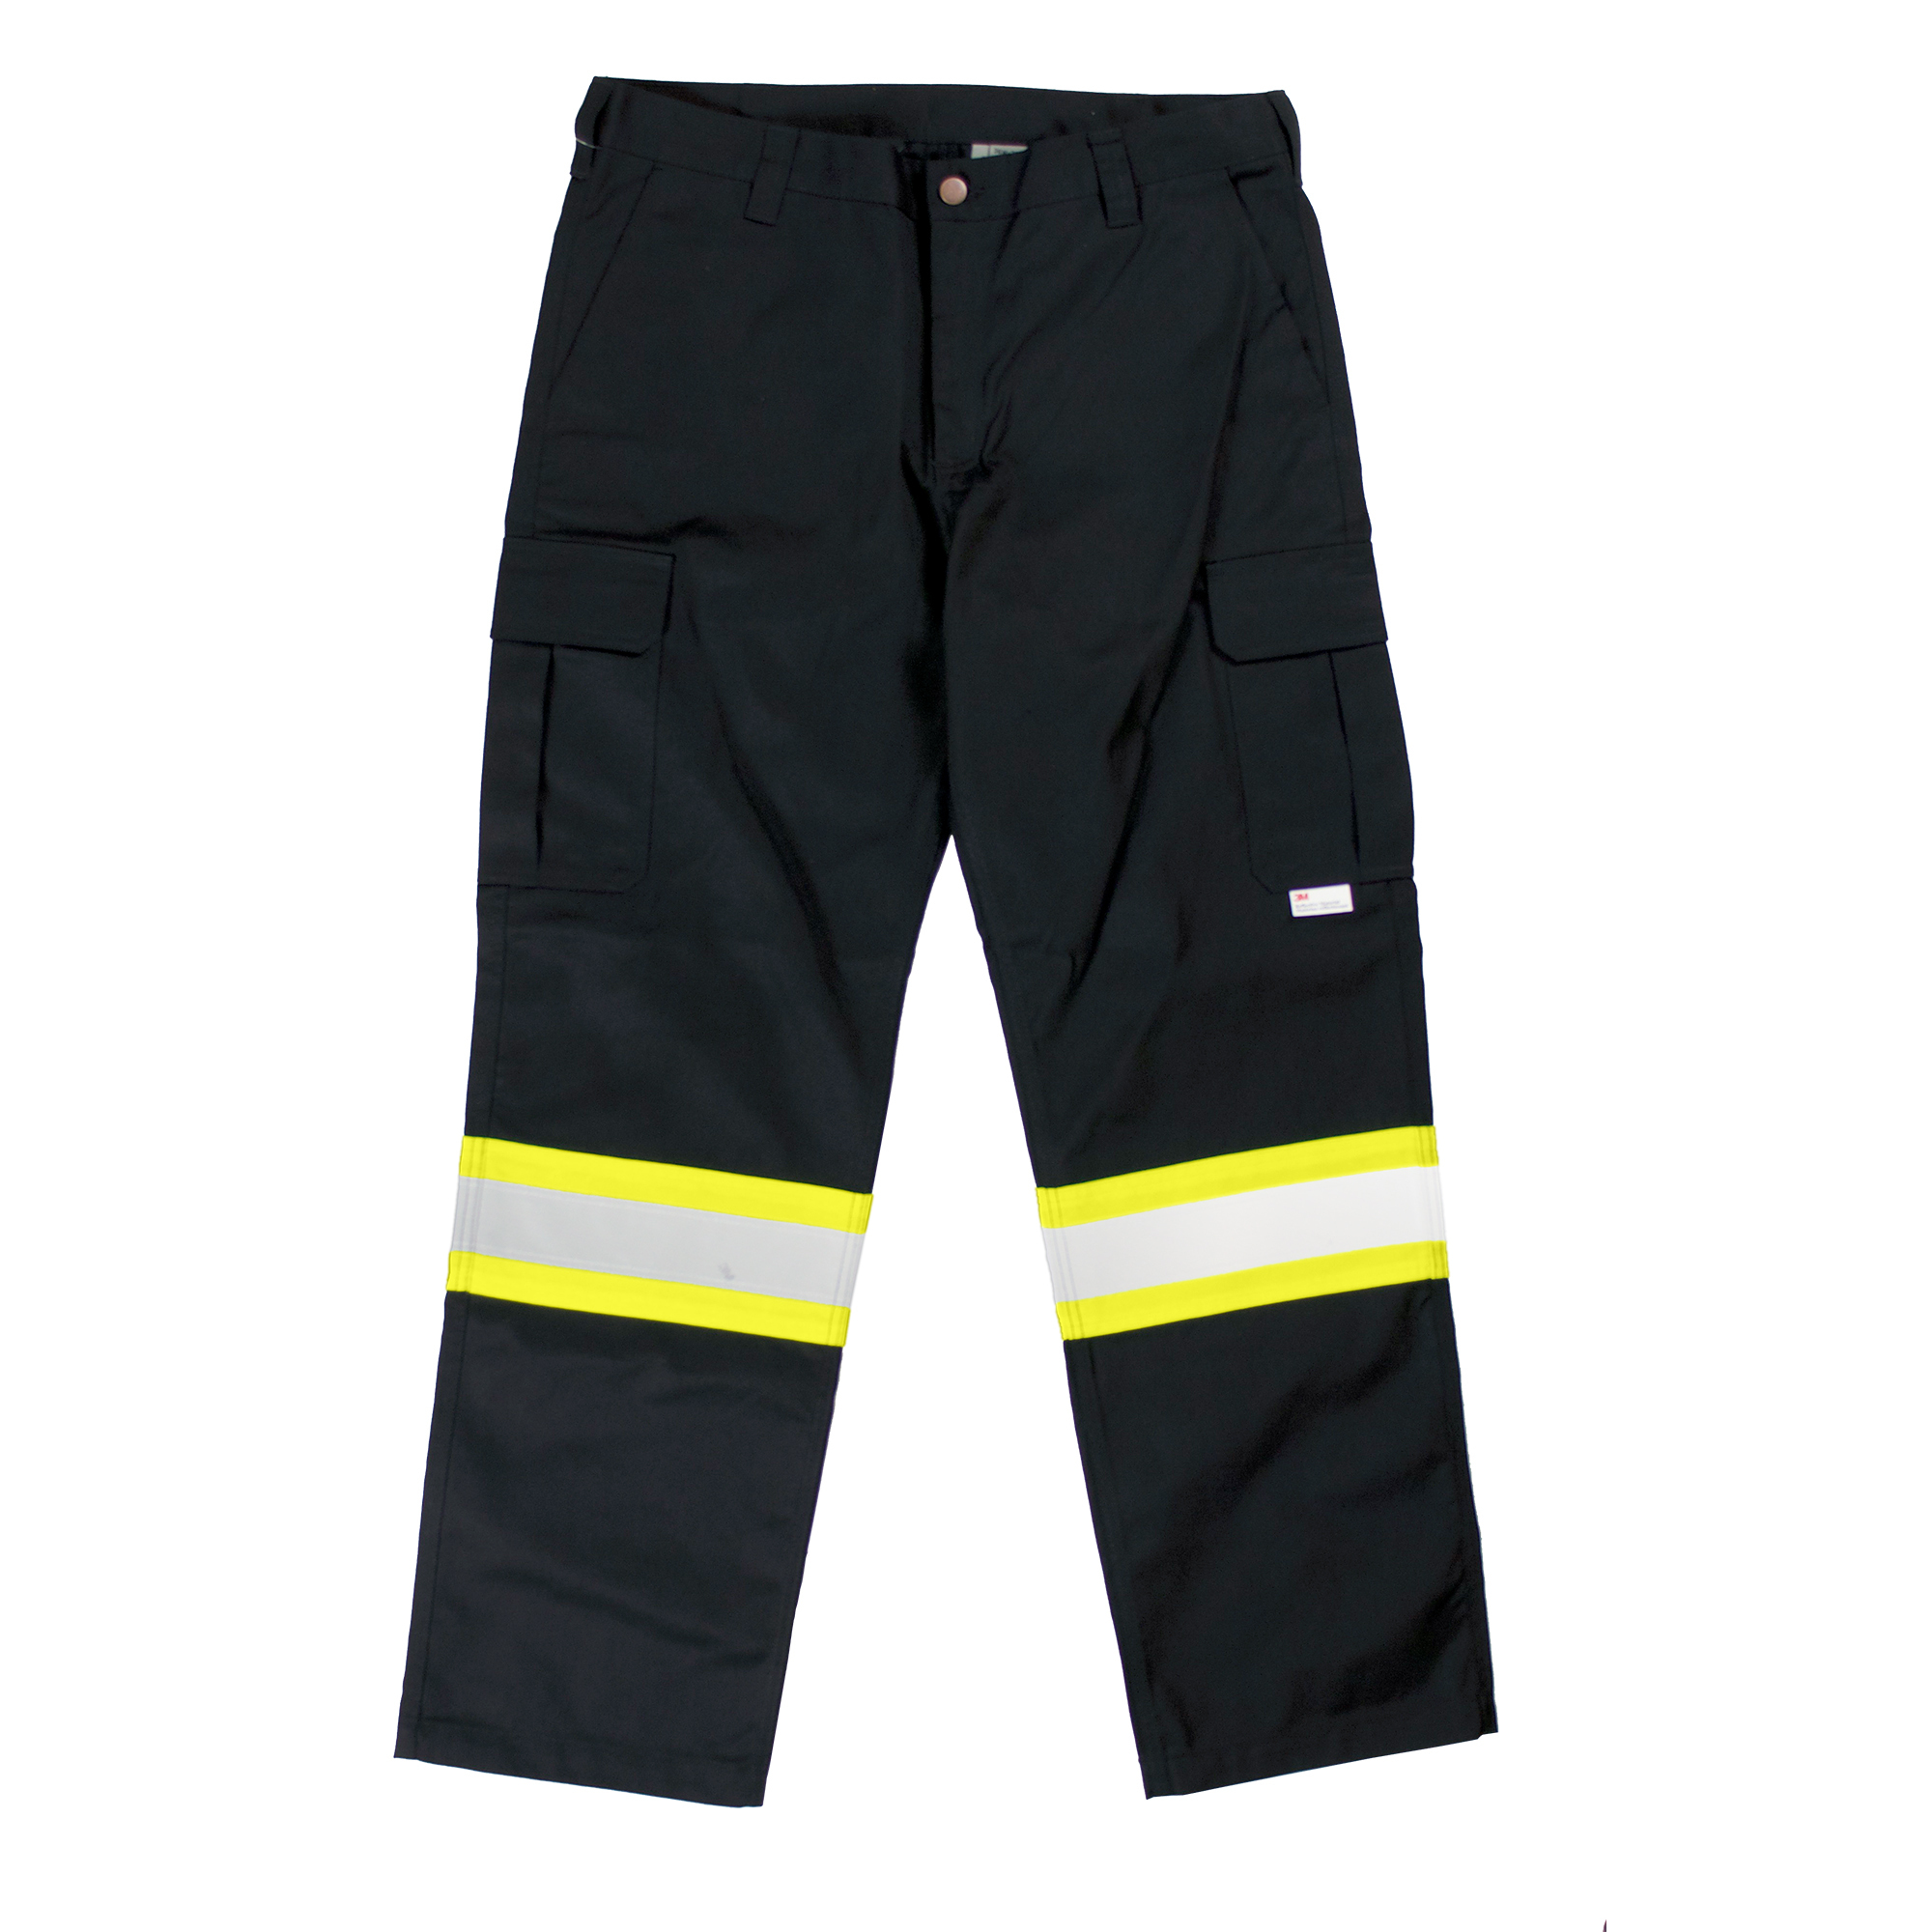 Tough Duck, Safety Cargo Utility Pant, Waist 32 in, Inseam 32 in, Color Black, Model S60711